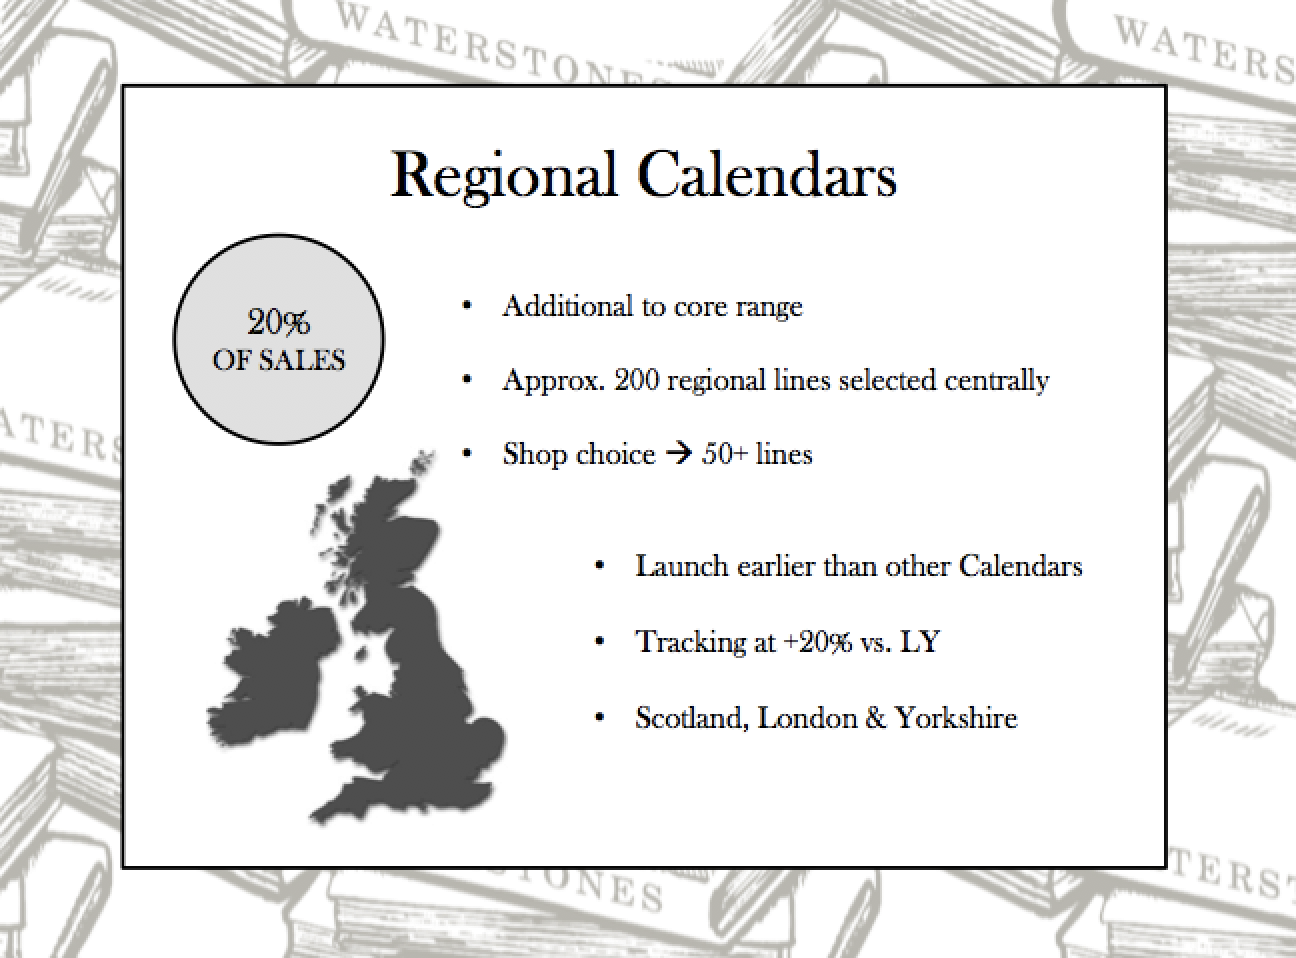 Above: The chain does tremendously well with regional calendars. 